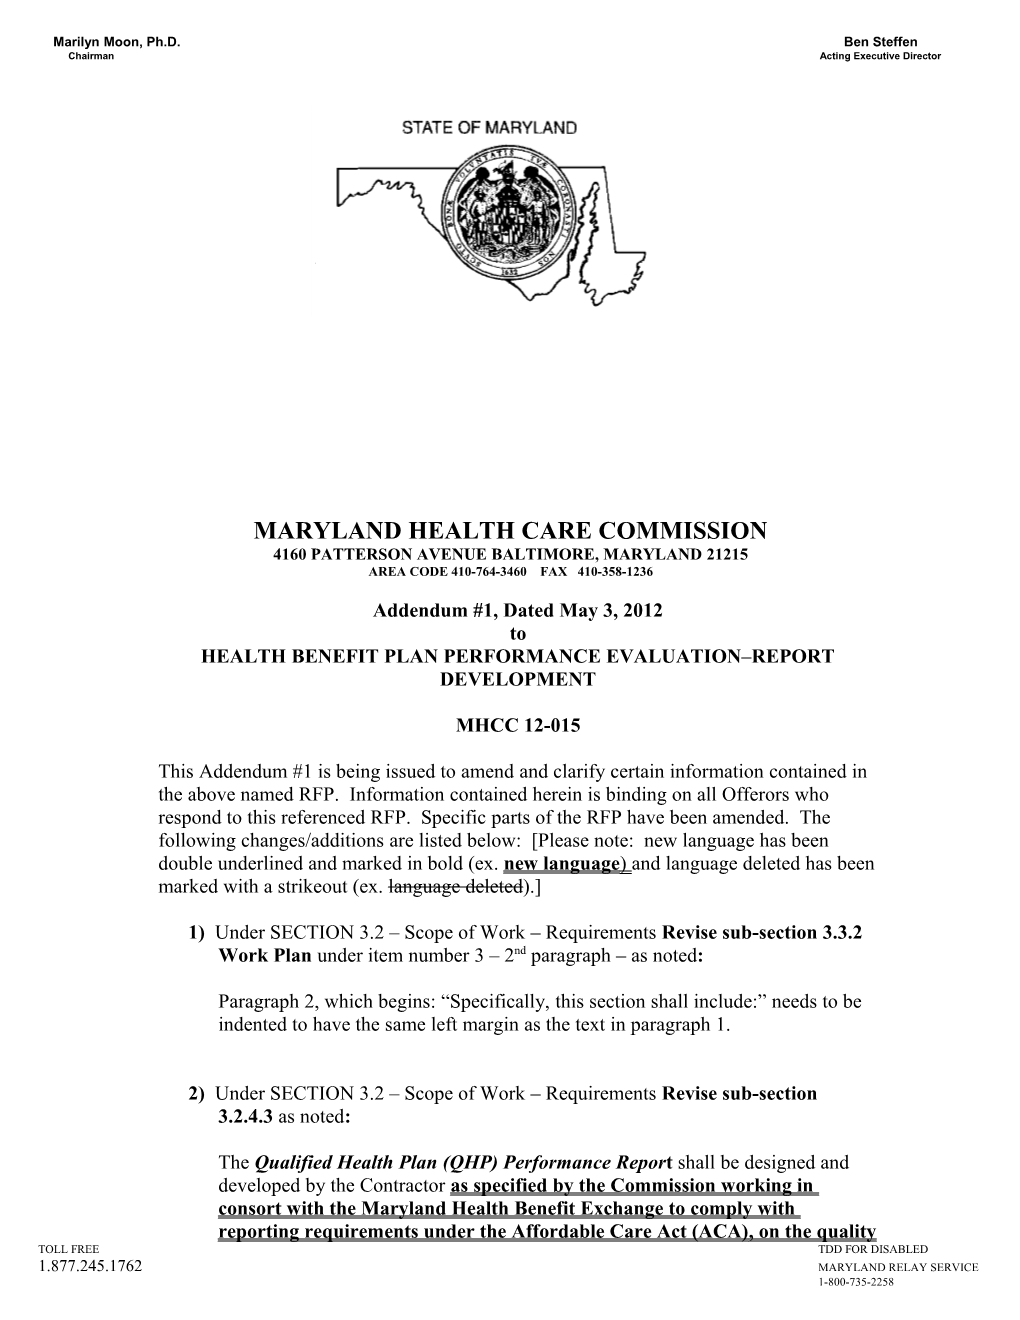 Maryland Health Care Commission s1